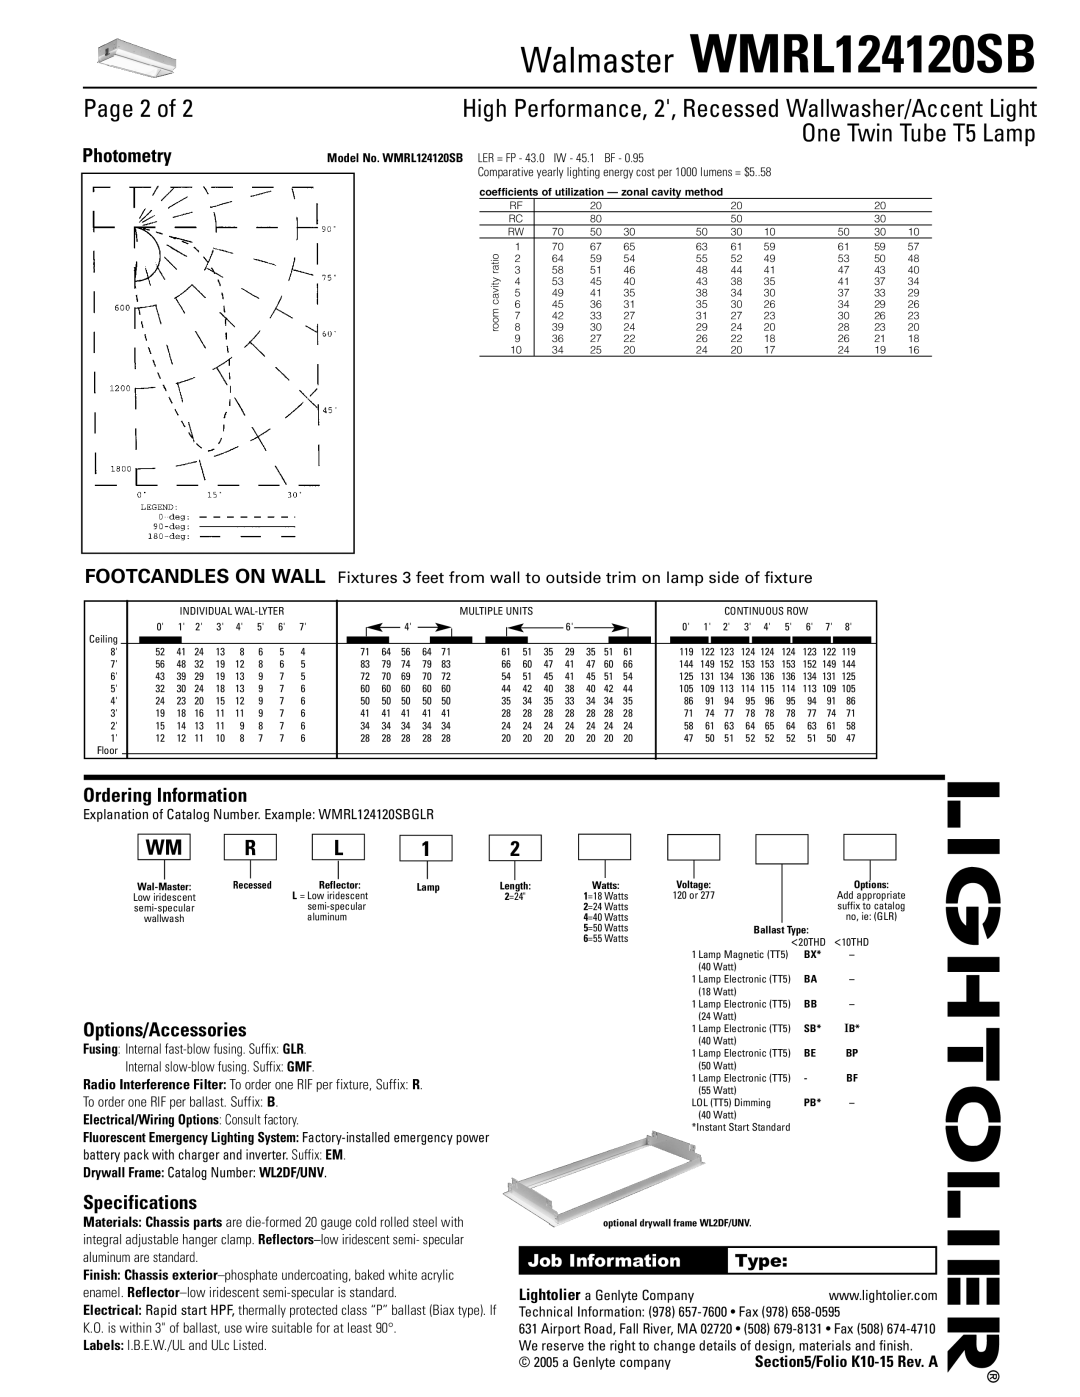 Lightolier Walmaster WMRL124120SB, Page 2 of, One Twin Tube T5 Lamp, Photometry, Ordering Information, Specifications 